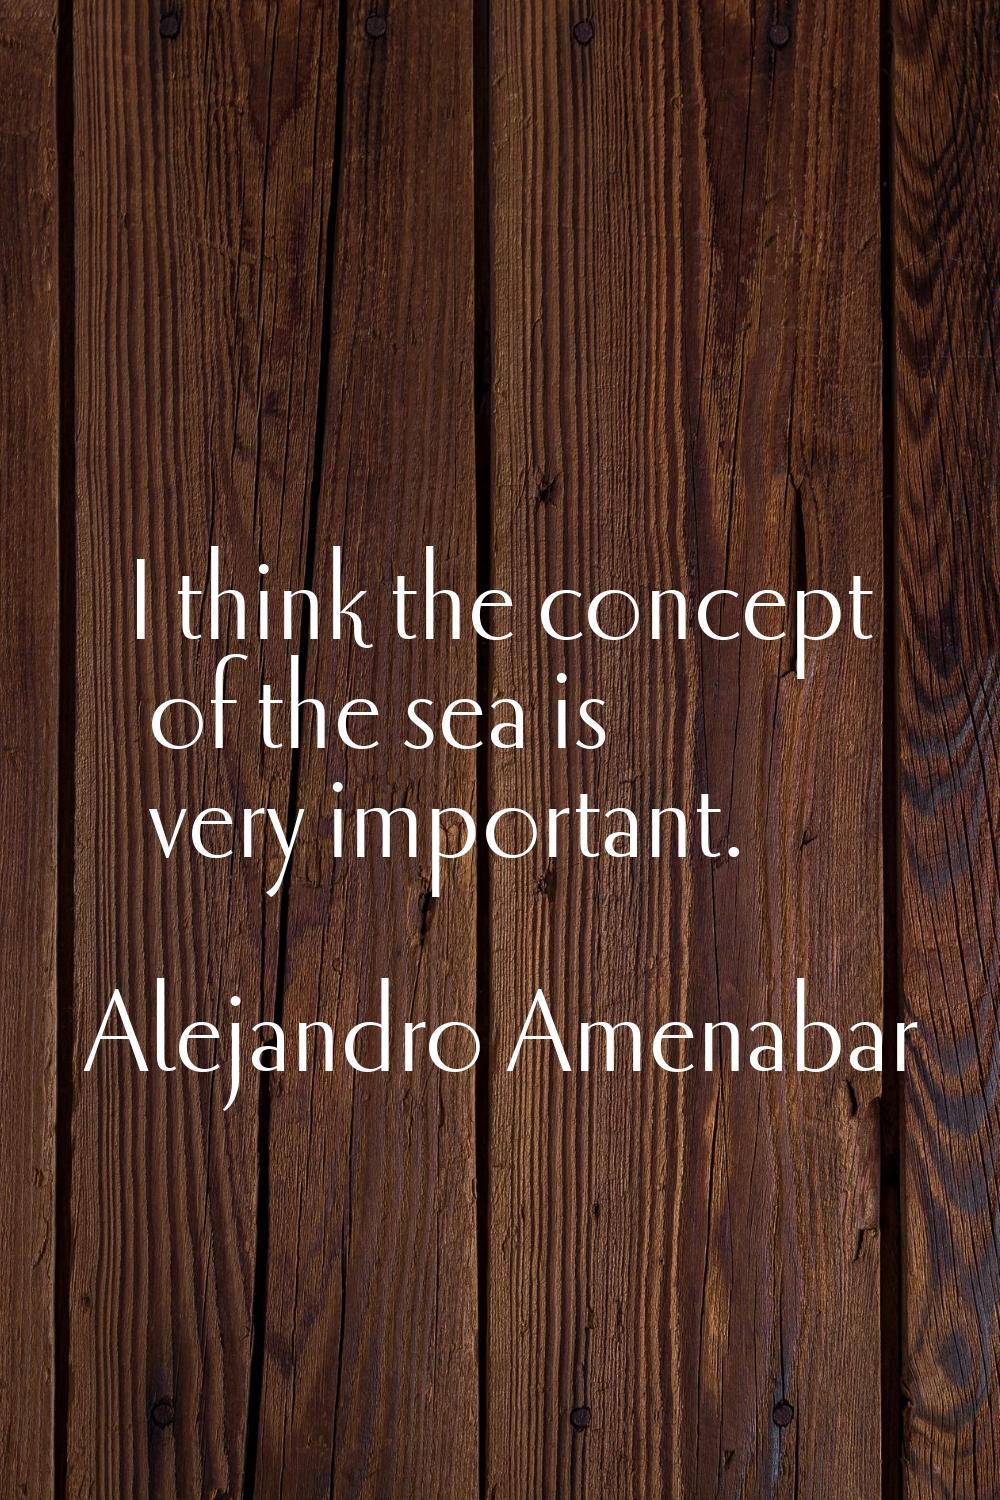 I think the concept of the sea is very important.